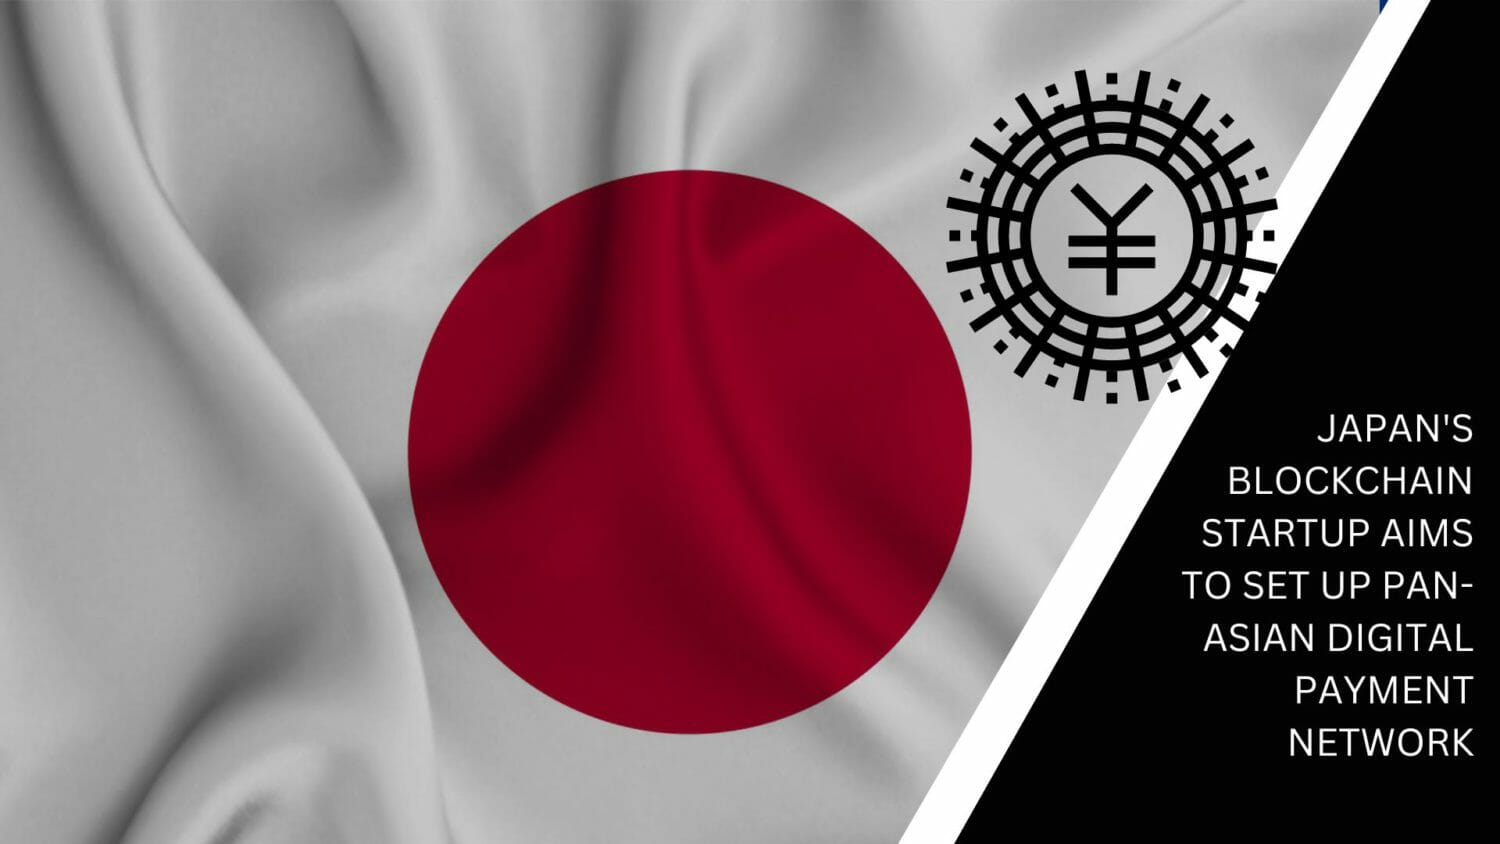 Japan'S Blockchain Startup Aims To Set Up Pan-Asian Digital Payment Network